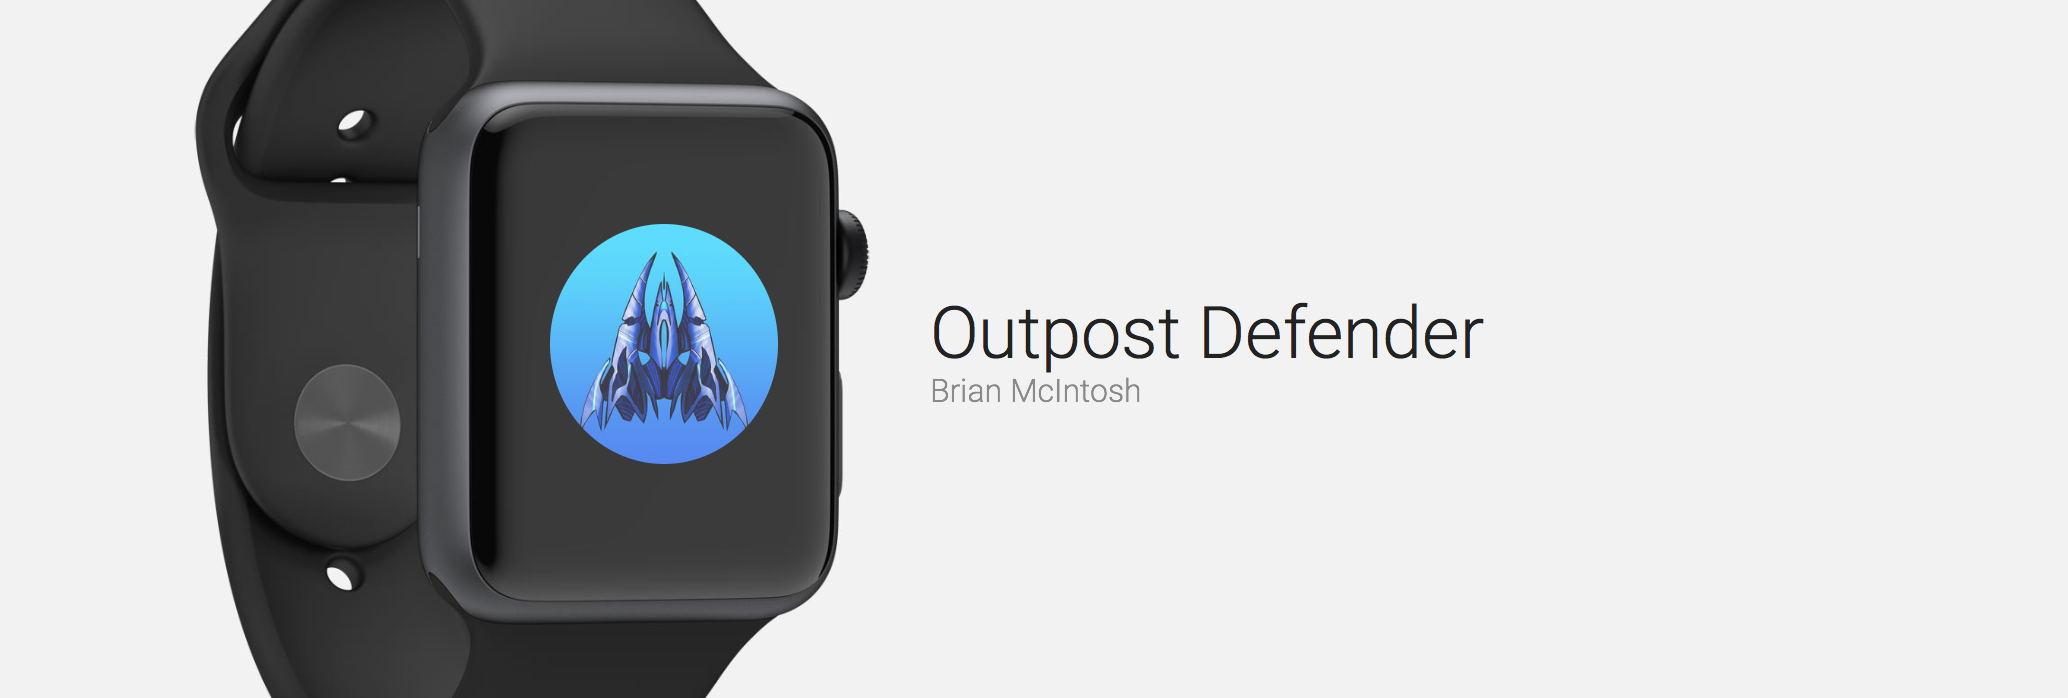 Outpost Defender is an Arcade Style Game for Apple Watch